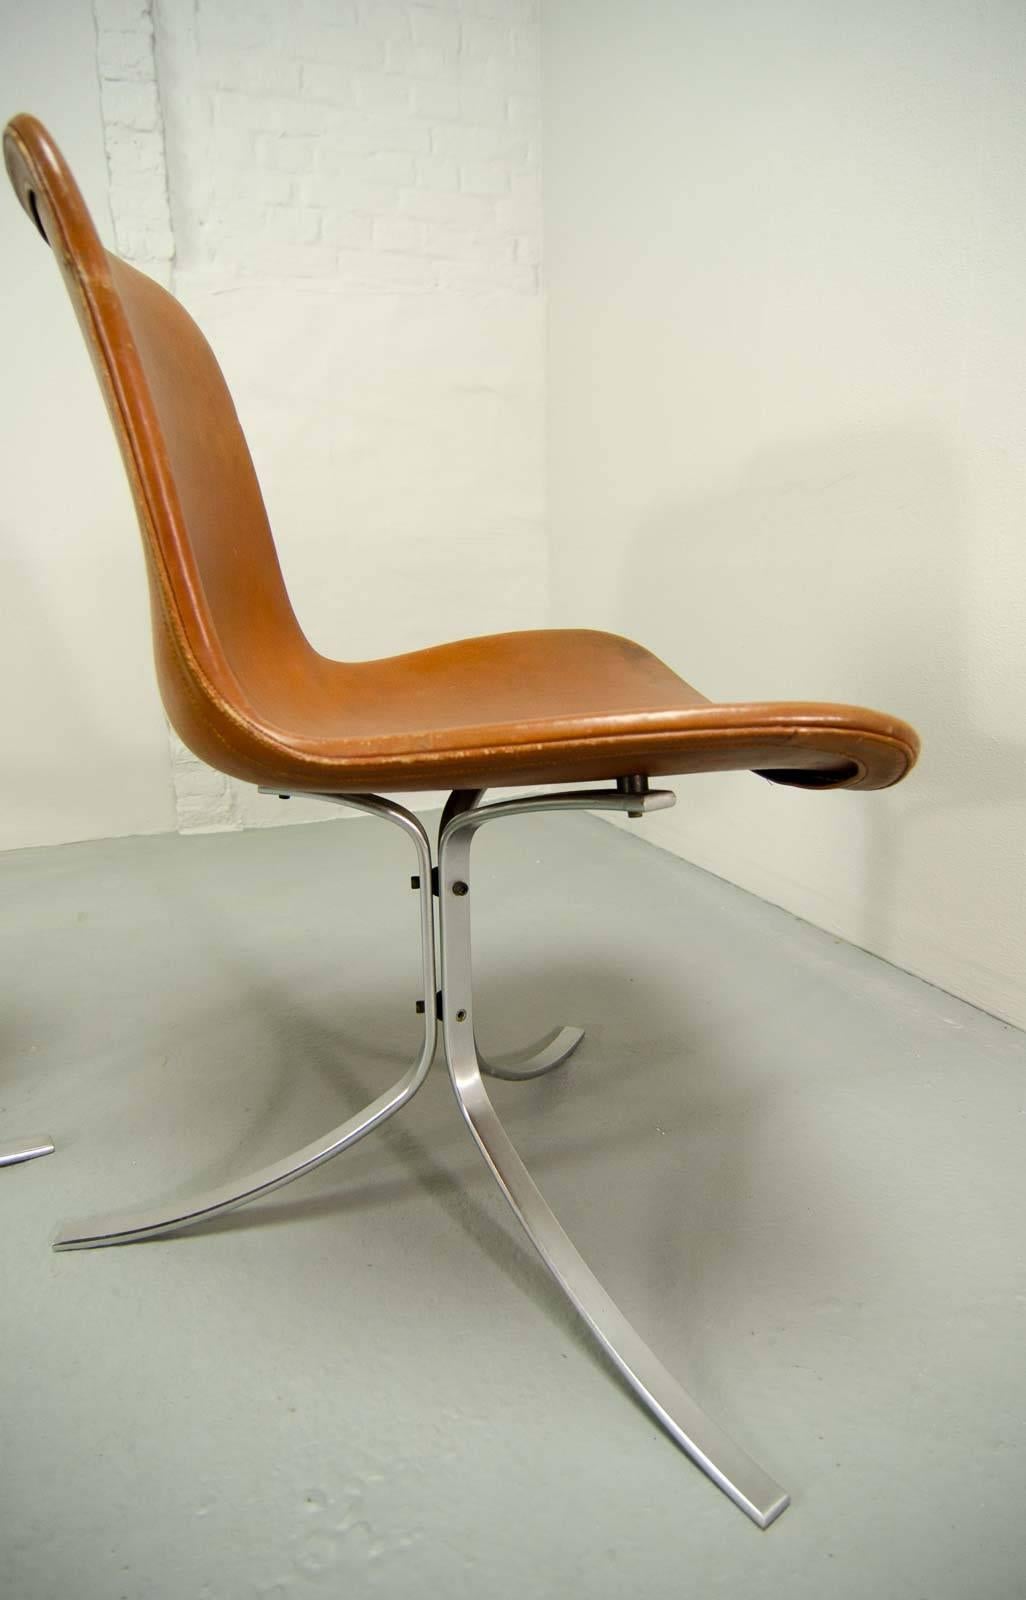 Superb First Edition PK9 Dining Chairs by Poul Kjaerholm for E. Kold Christensen 1